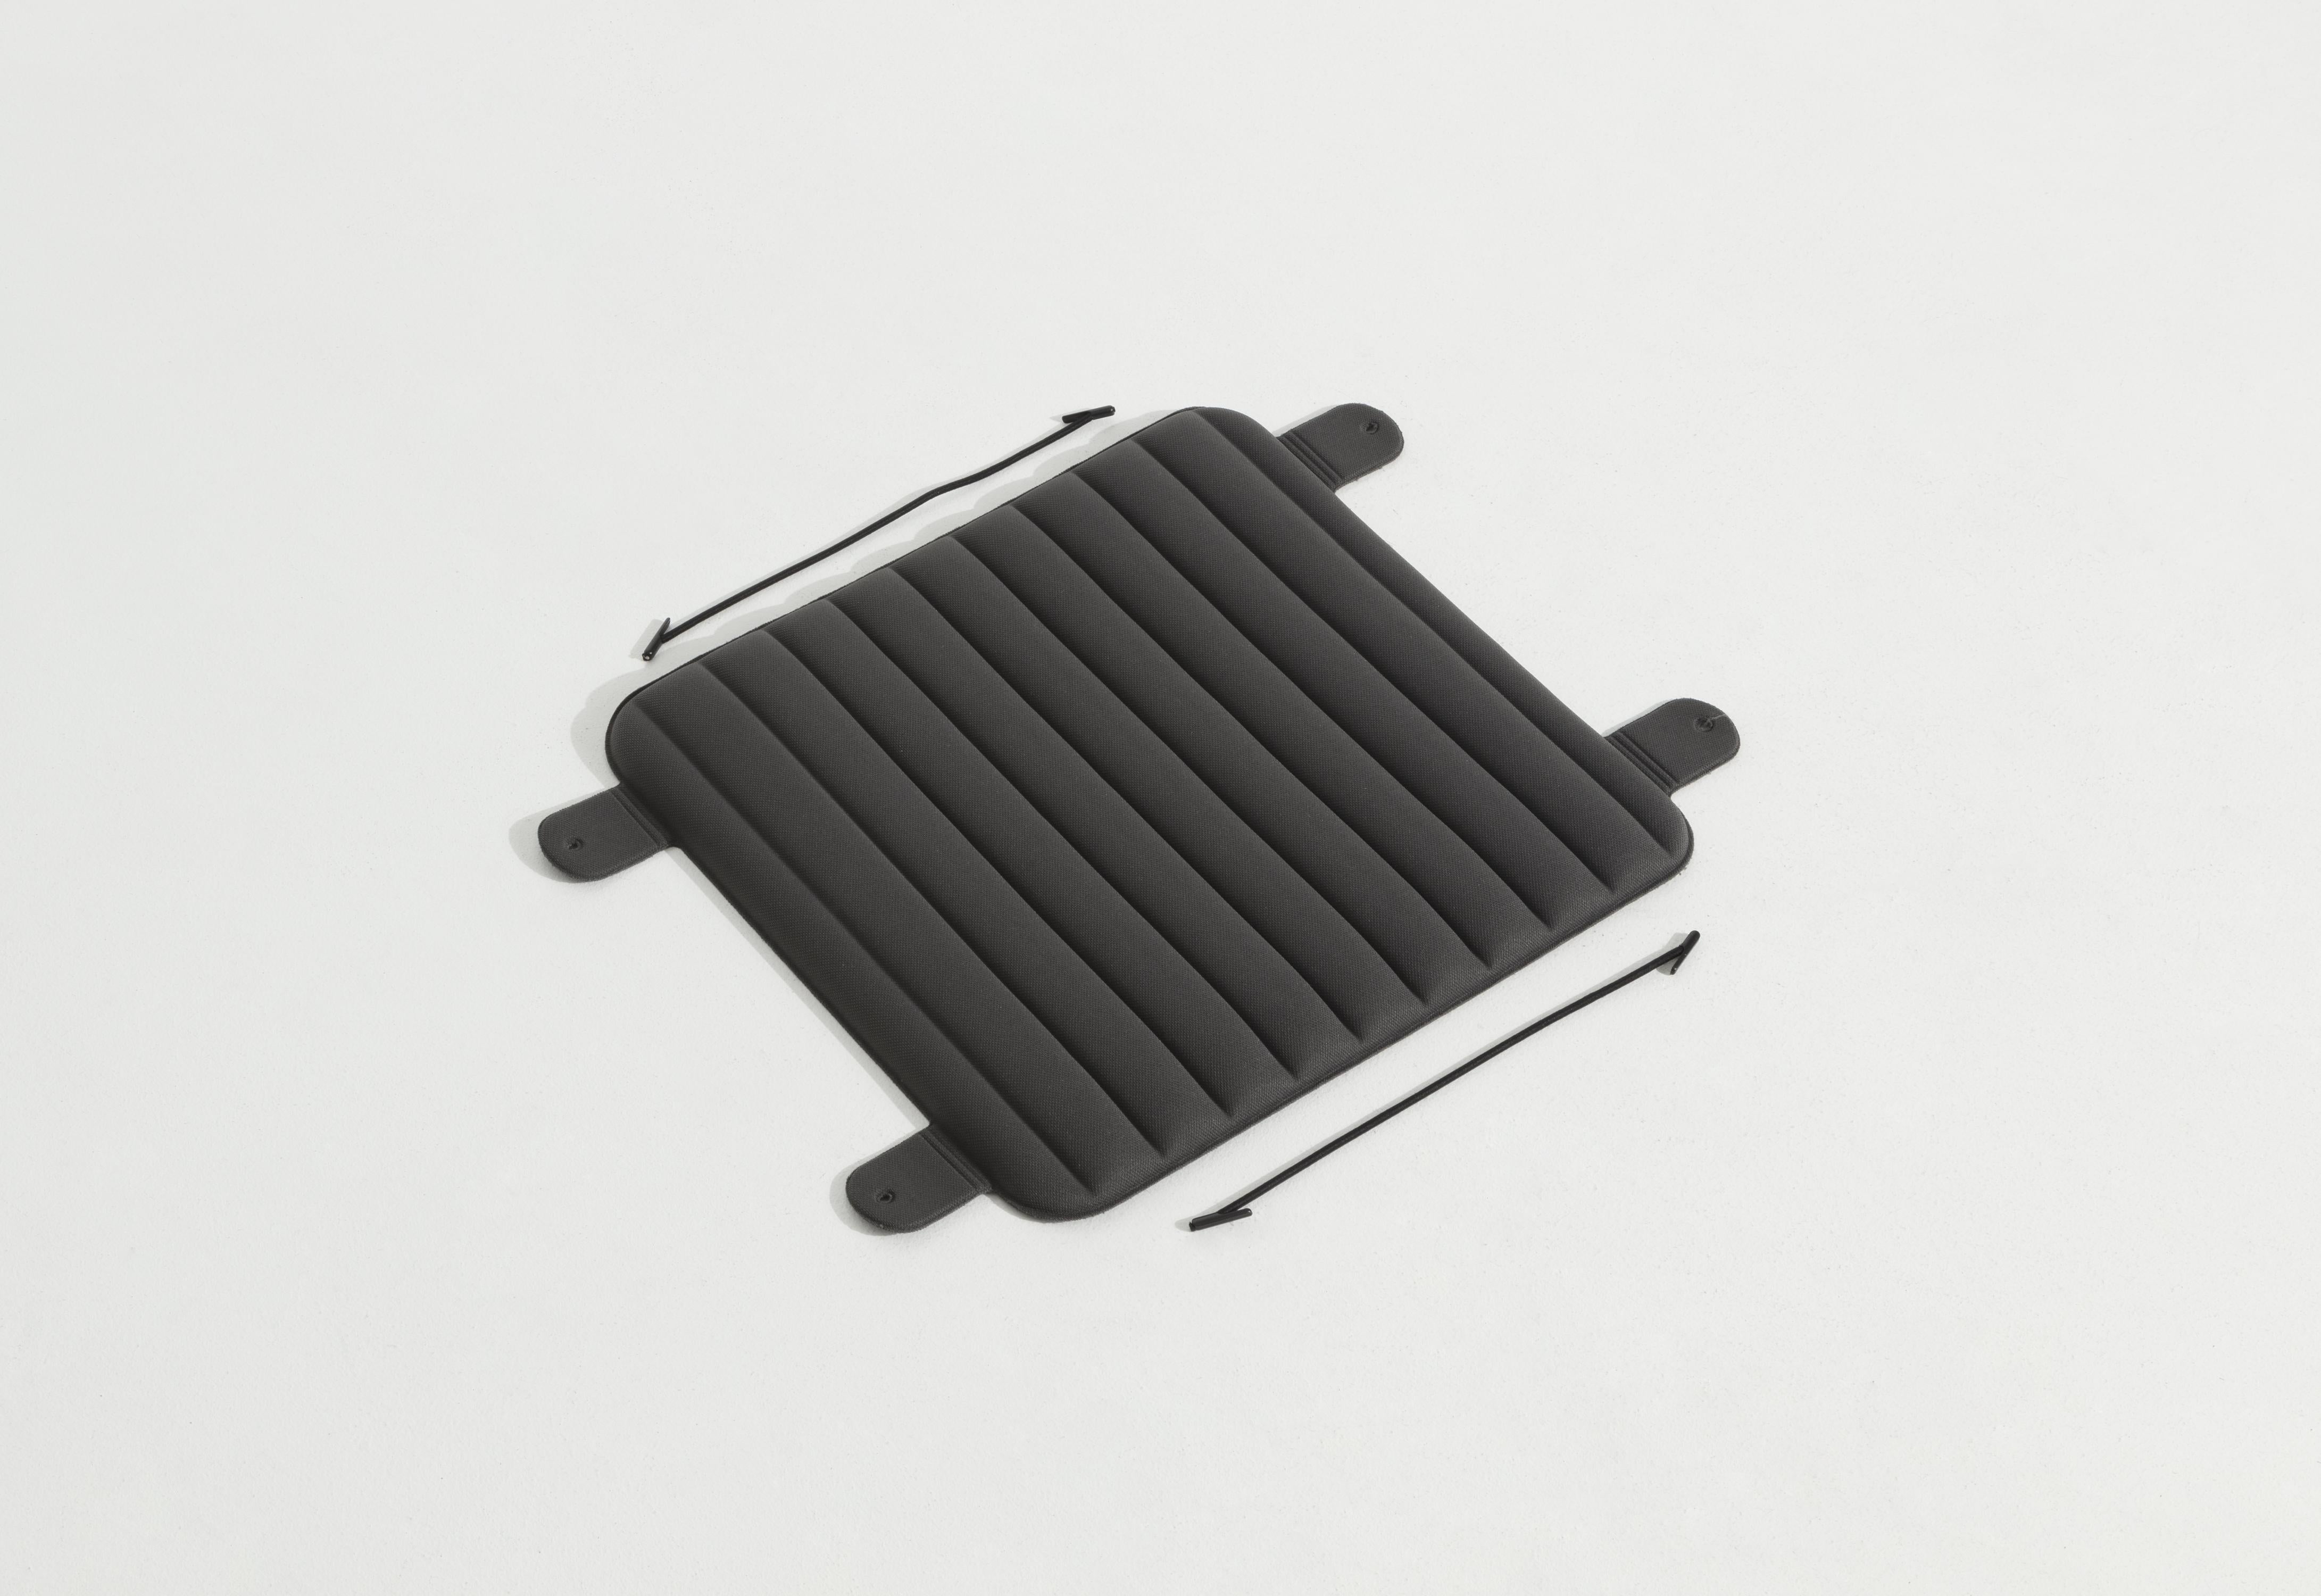 Petite Friture Week-End Large Seat Cushions in Anthracite by Studio BrichetZiegler, 2019

The week-end collection is a full range of outdoor furniture, in aluminium grained epoxy paint, matt finish, that includes 18 functions and 8 colours for the